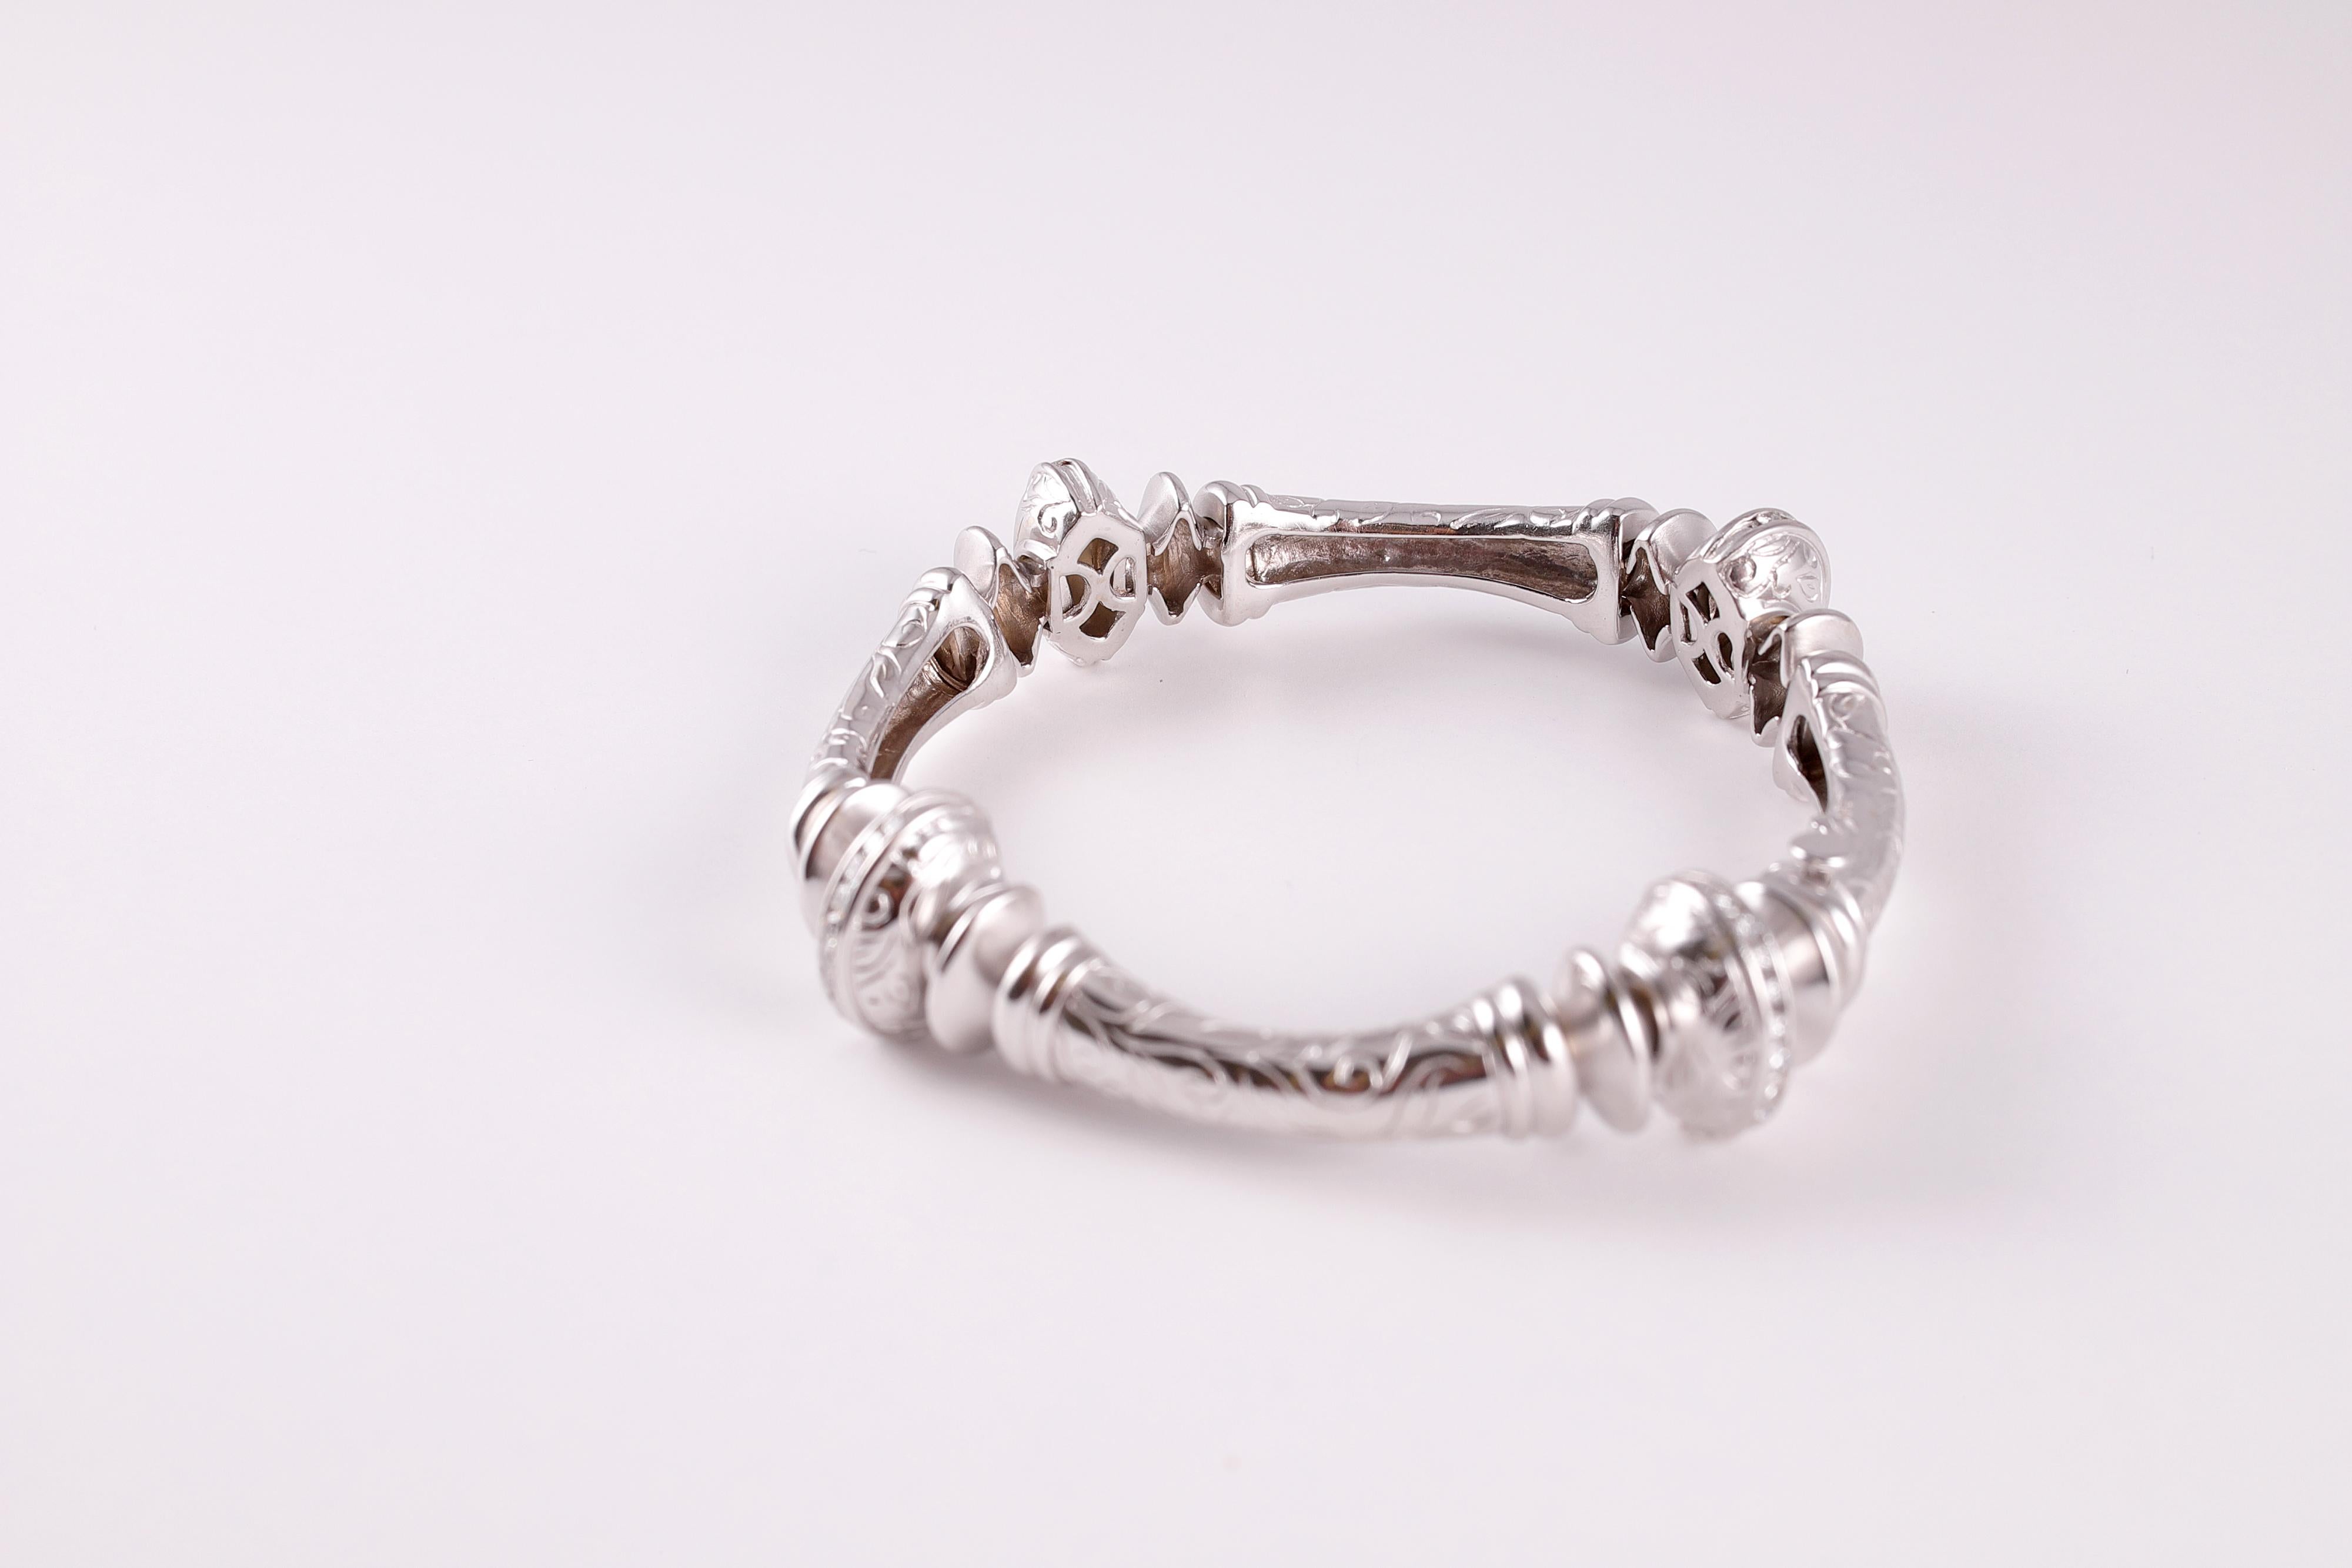 Women's or Men's White Gold Diamond Bracelet by Seidengang from the Laurel Collection